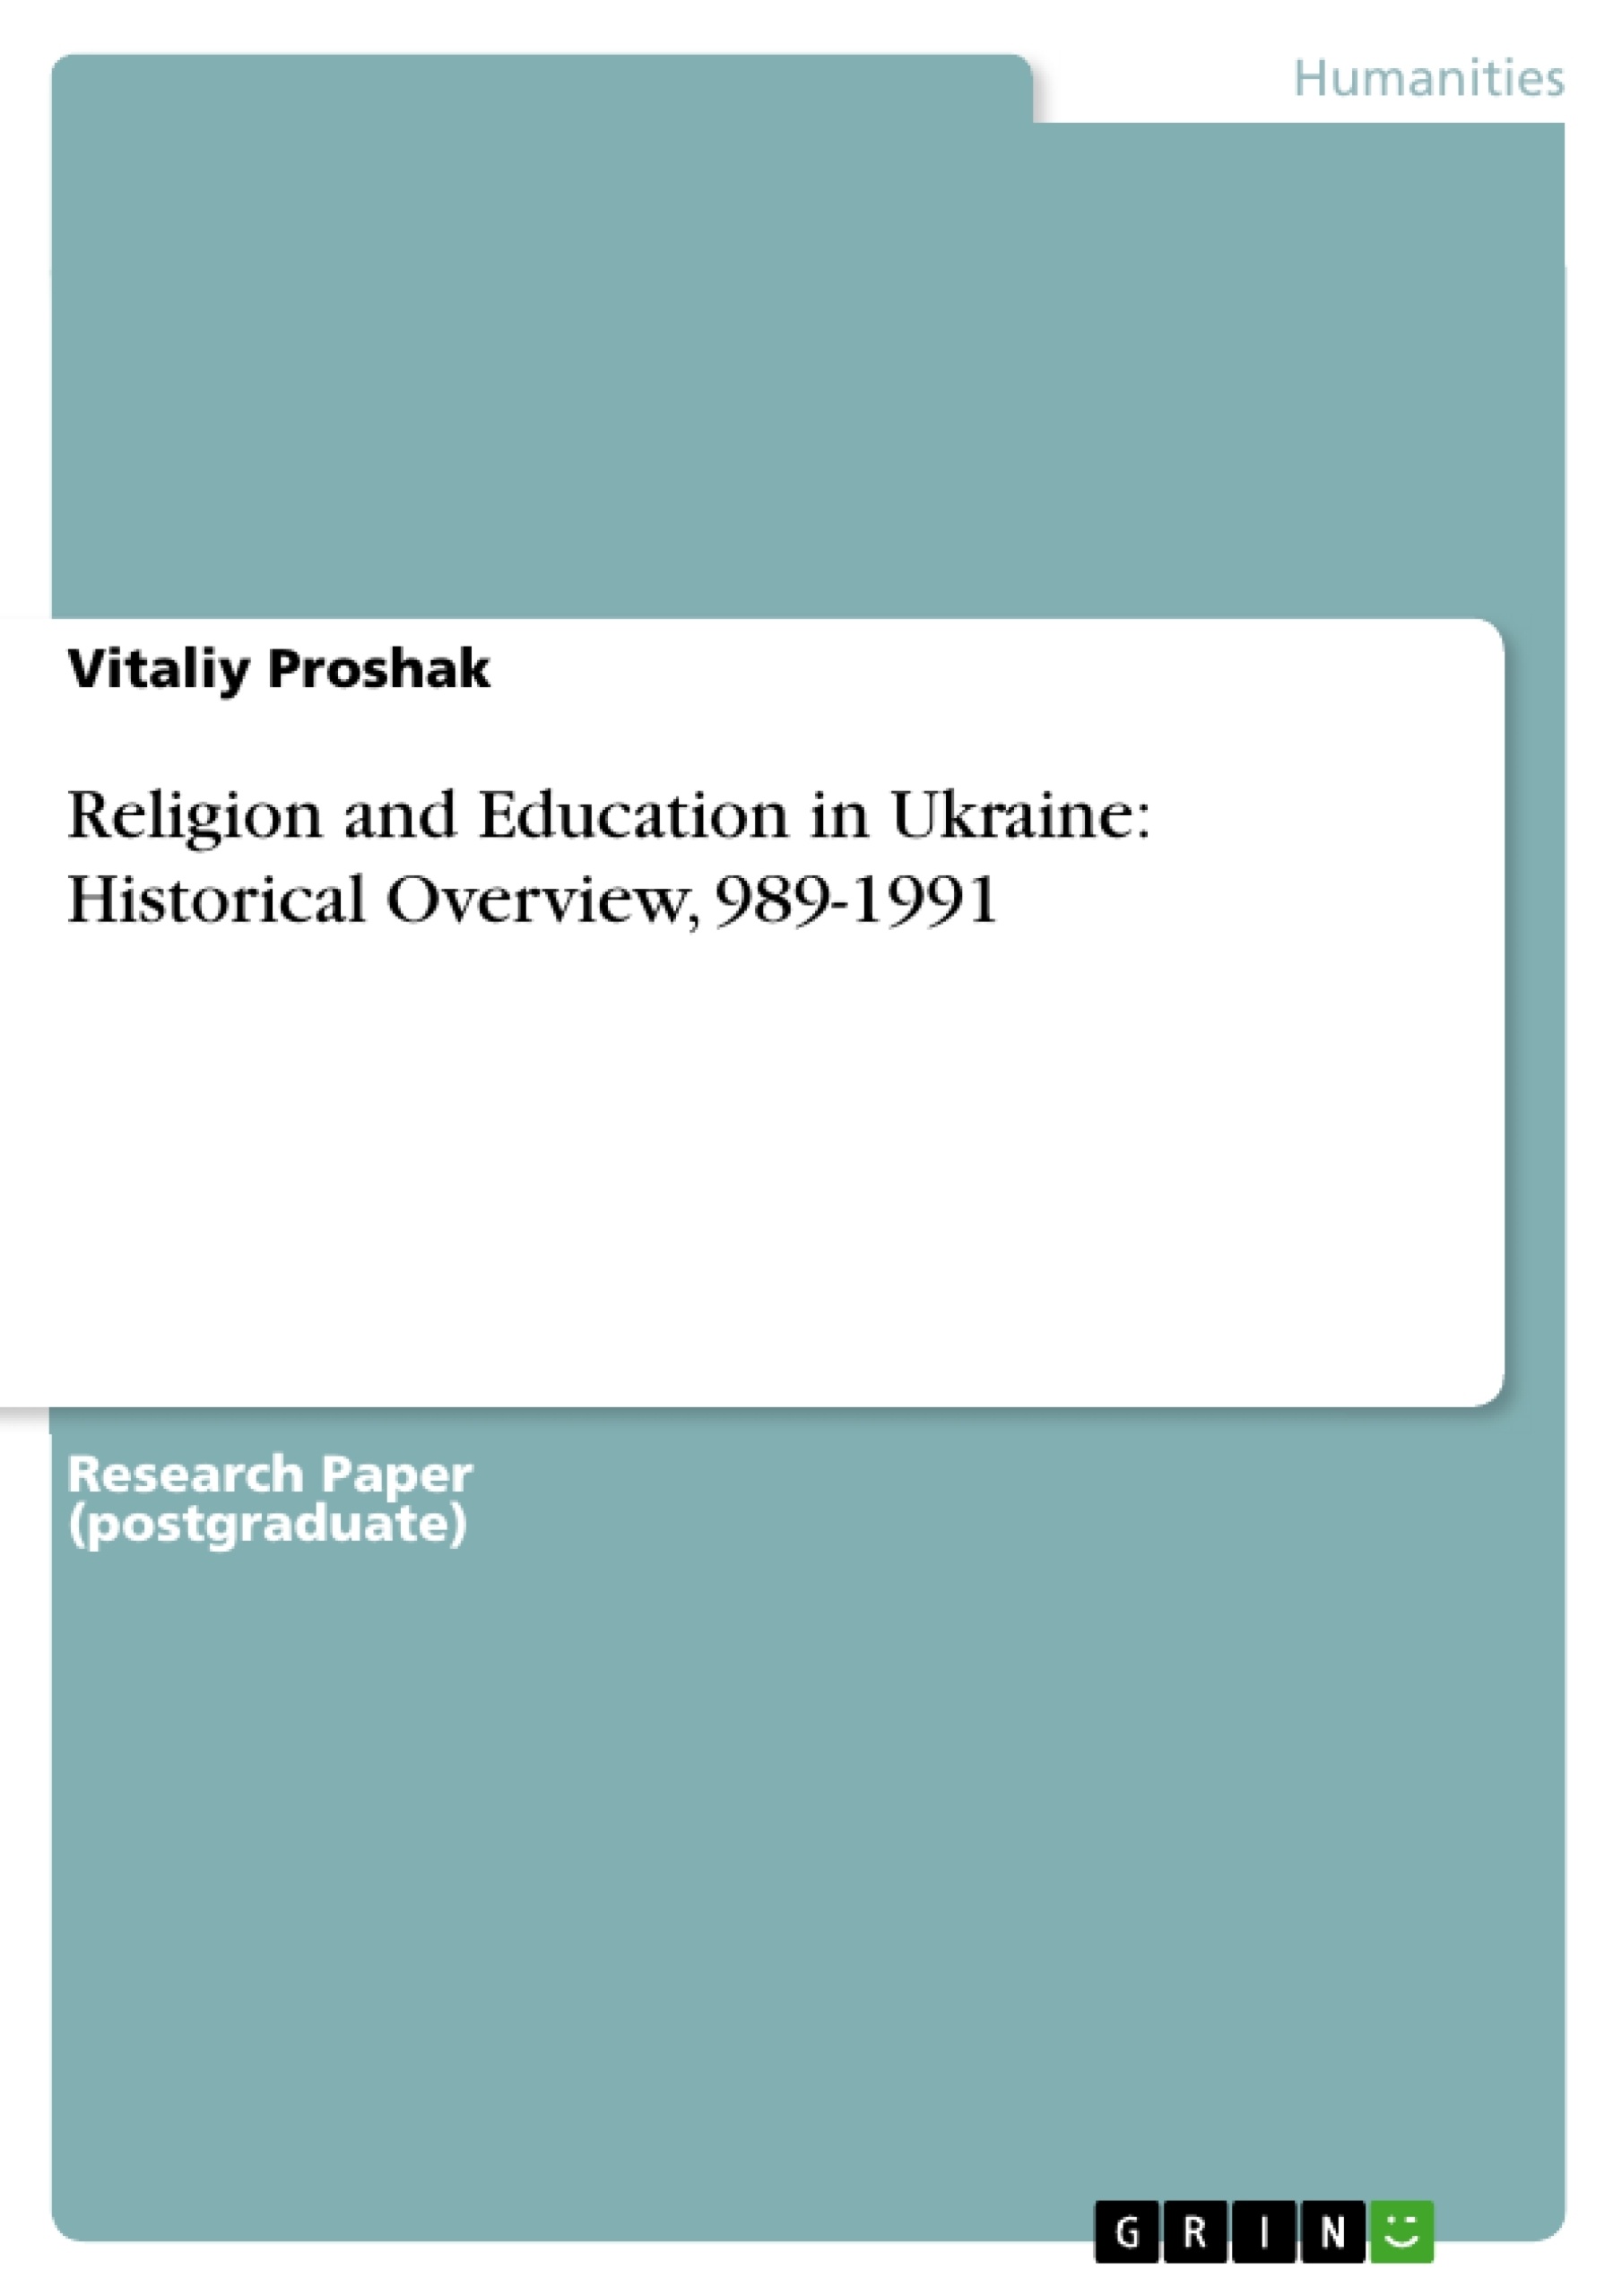 Titre: Religion and Education in Ukraine: Historical Overview, 989-1991